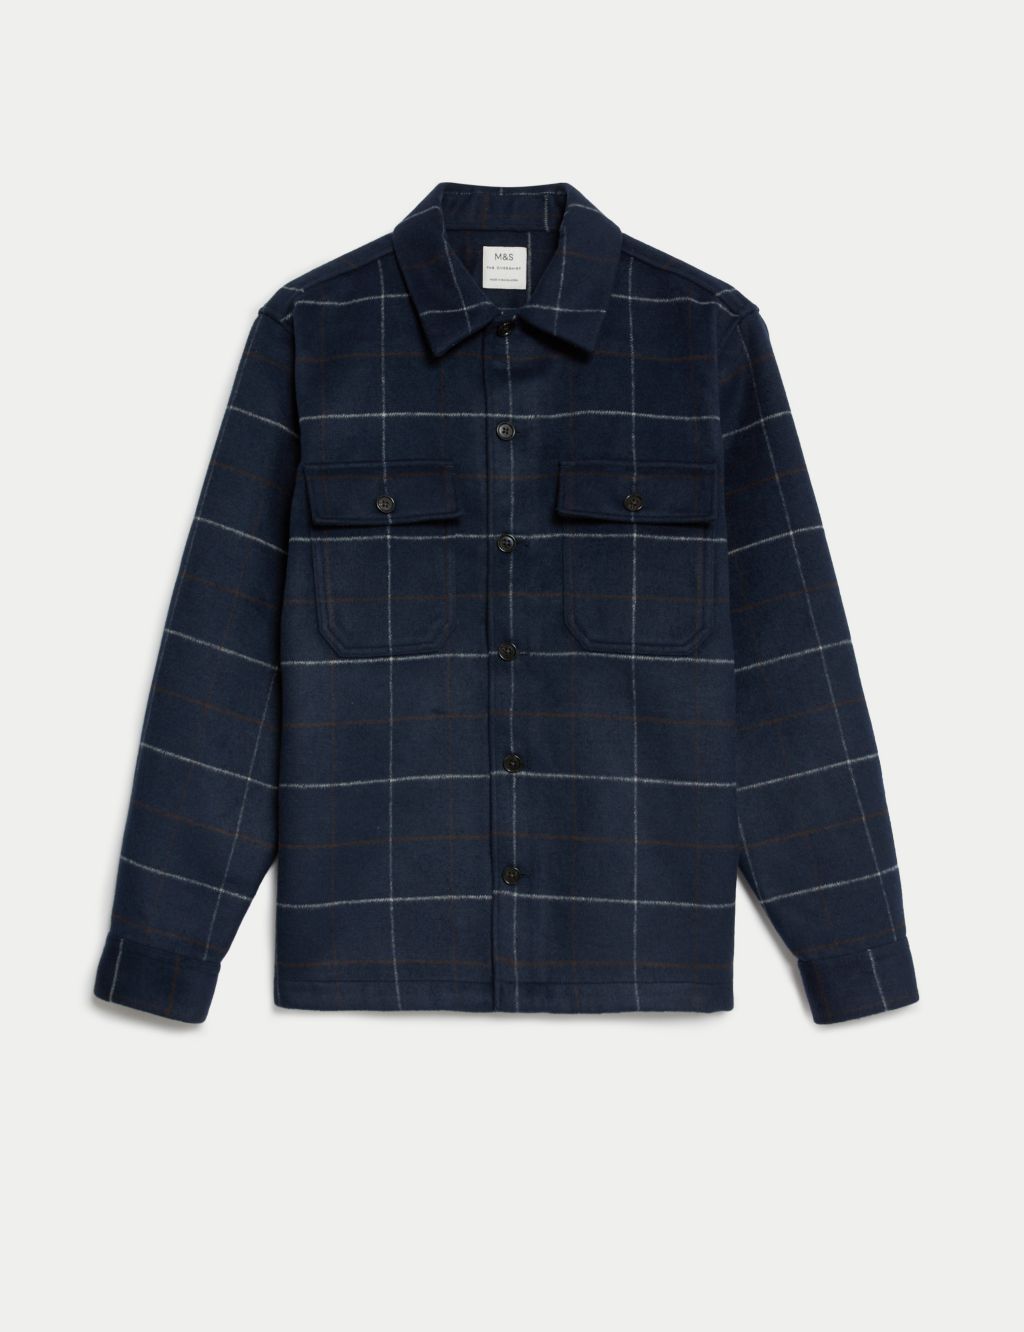 Double Faced Check Overshirt image 2